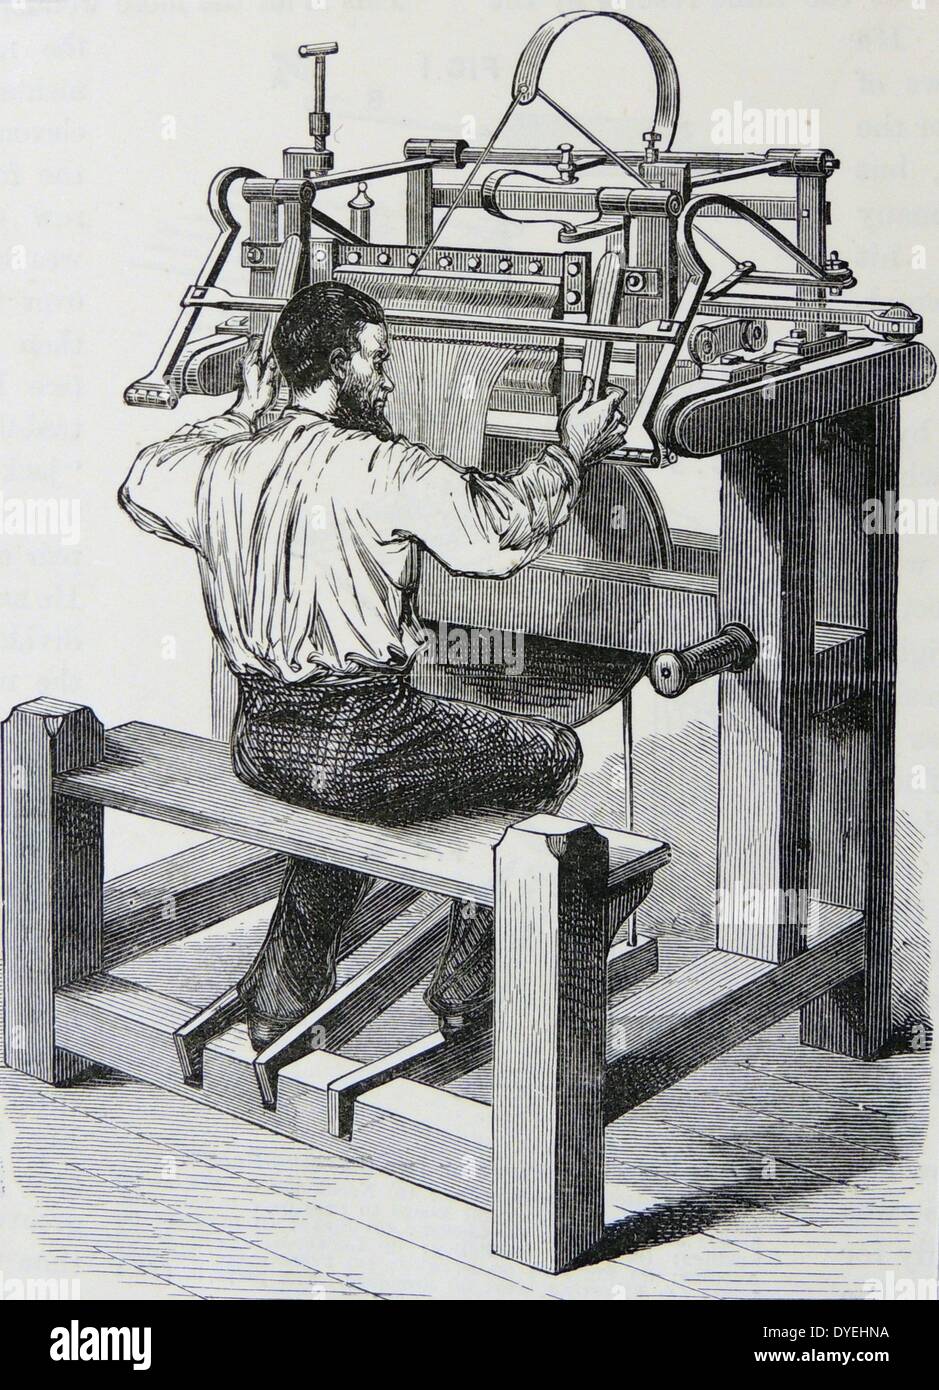 Stocking-frame weaver at work on a treadle operated machine. Engraving, London, c1880. Stock Photo